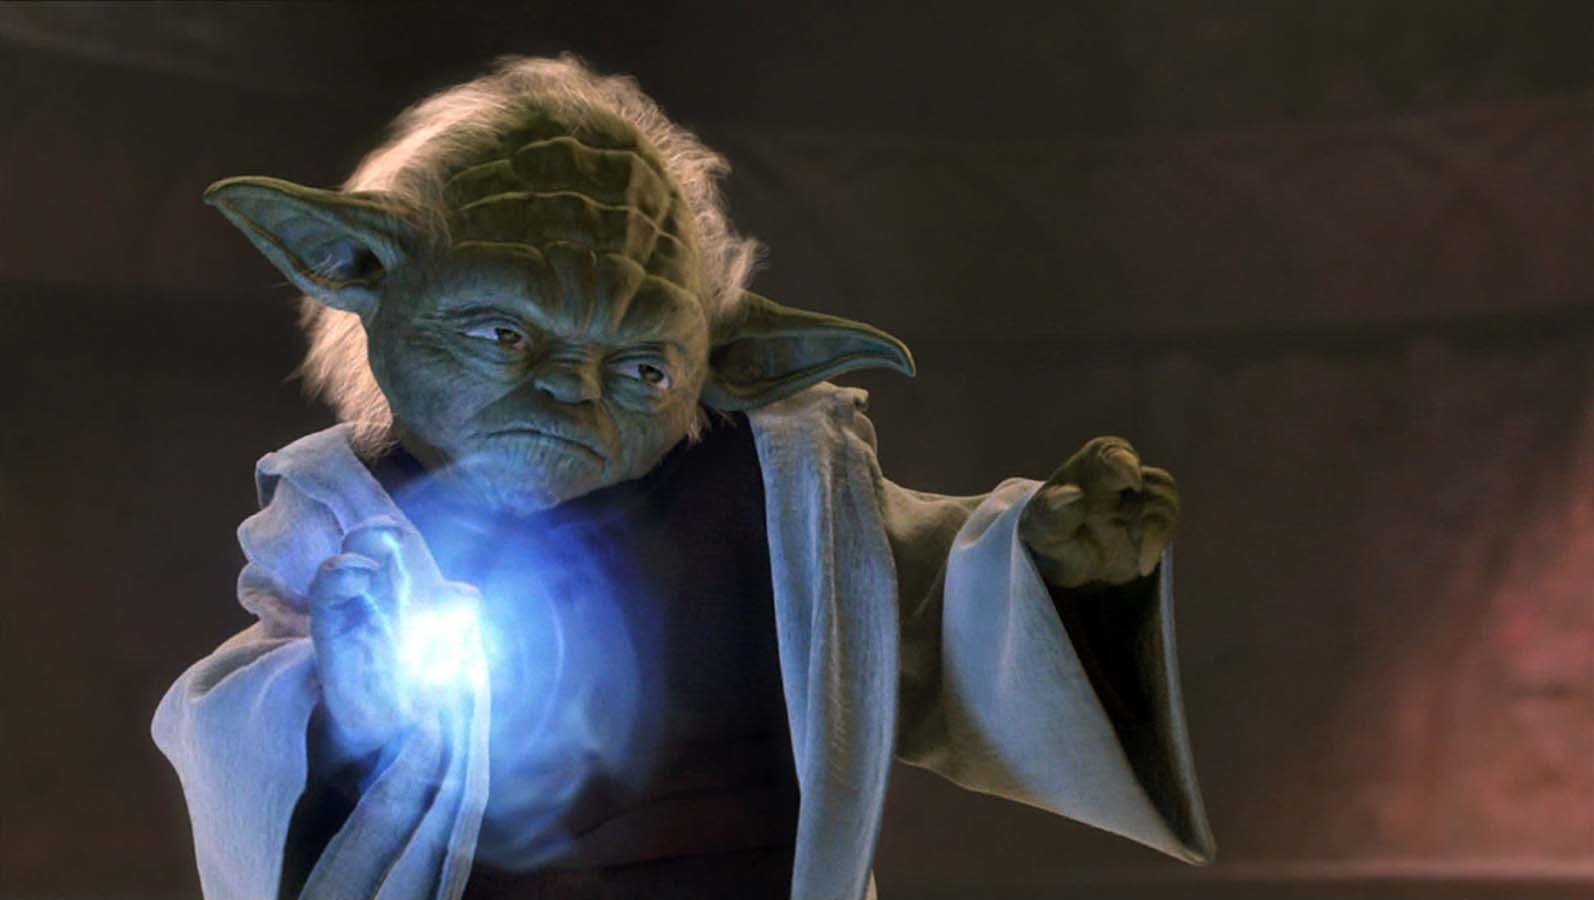 General 1594x900 Yoda Star Wars Jedi Star Wars: Episode II - The Attack of the Clones force lightning movie scenes movies CGI science fiction